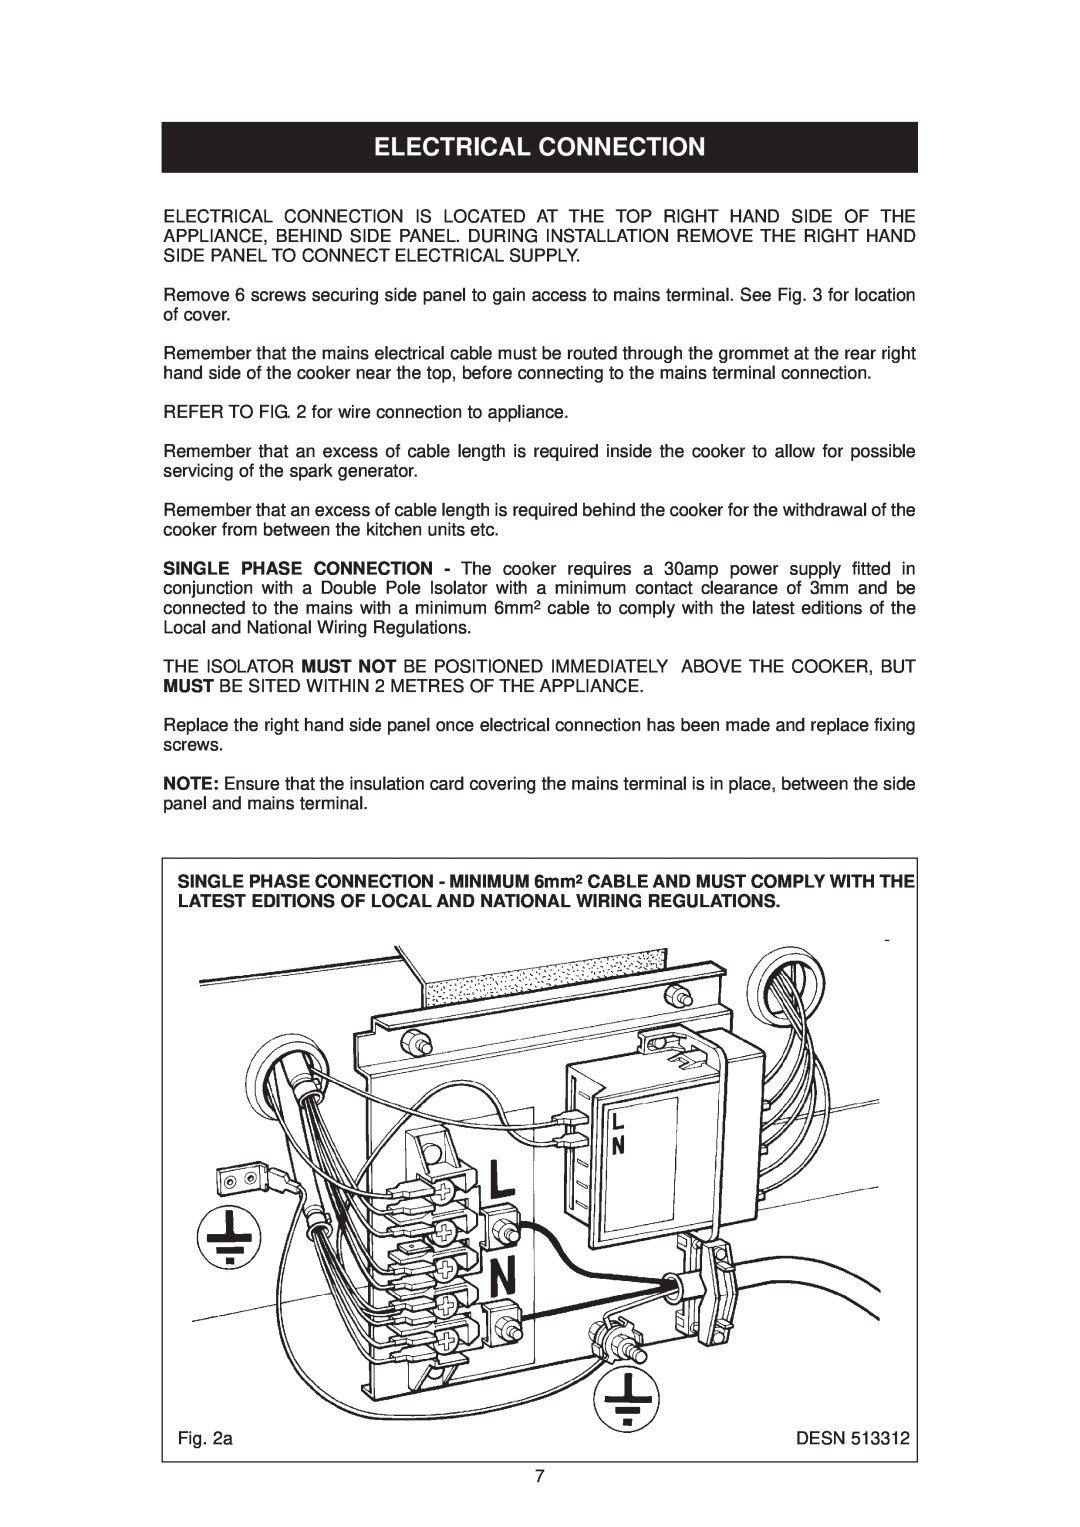 Aga Ranges DESN 512387 A owner manual Electrical Connection 